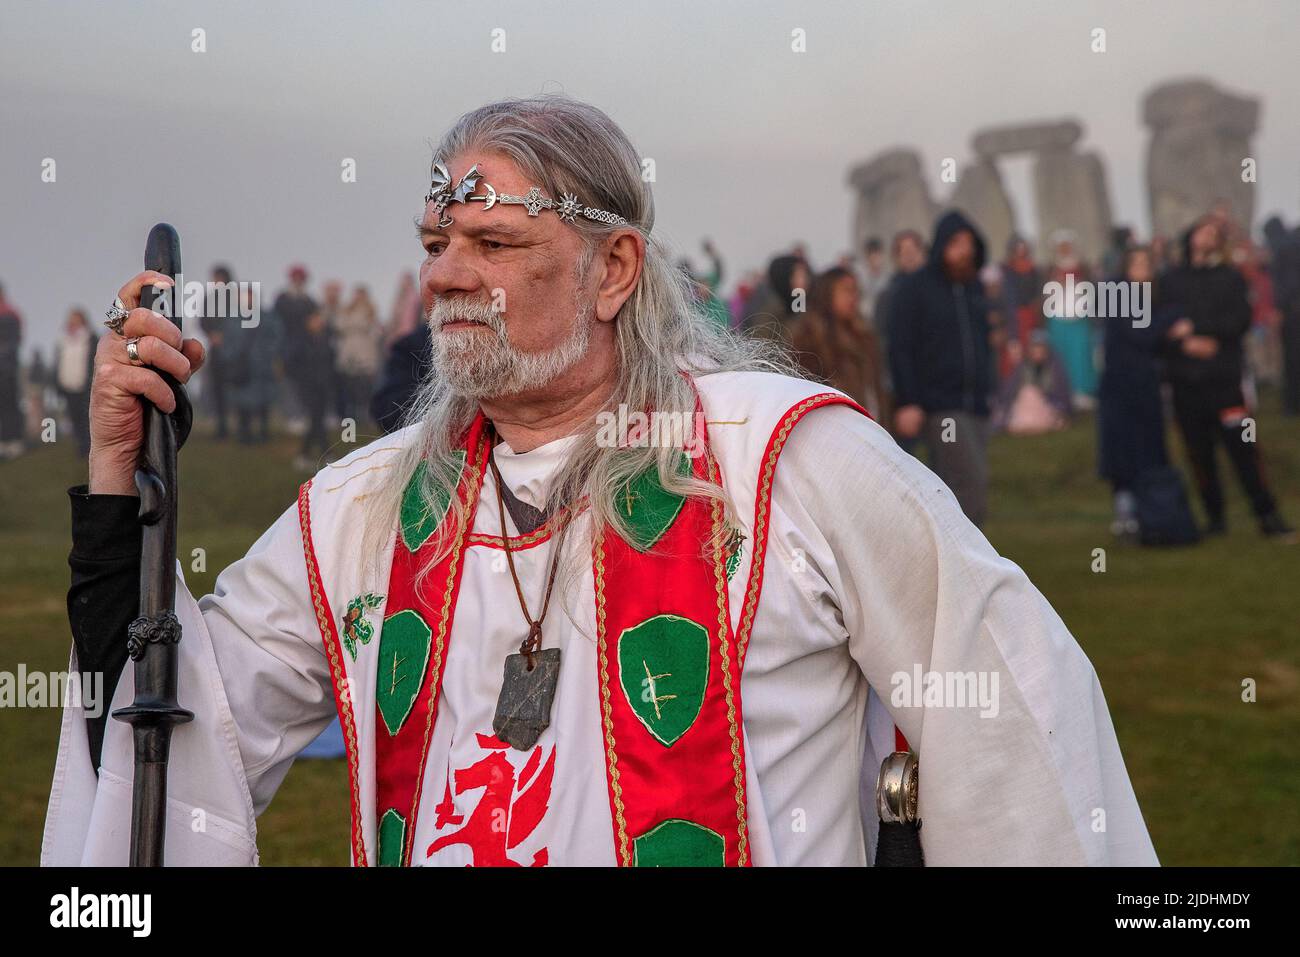 WILTSHIRE, ENGLAND - JUNE 21.2022: Druids, pagans and revellers gather at Stonehenge, hoping to see the sun rise, as they take part in the Summer Solstice celebrations at the ancient neolithic monument of Stonehenge near Salisbury on June 21st 2022 in Wiltshire, England. Several thousand people gathered at sunrise at the famous historic stone circle, a UNESCO listed ancient monument, to celebrate the solstice Stock Photo